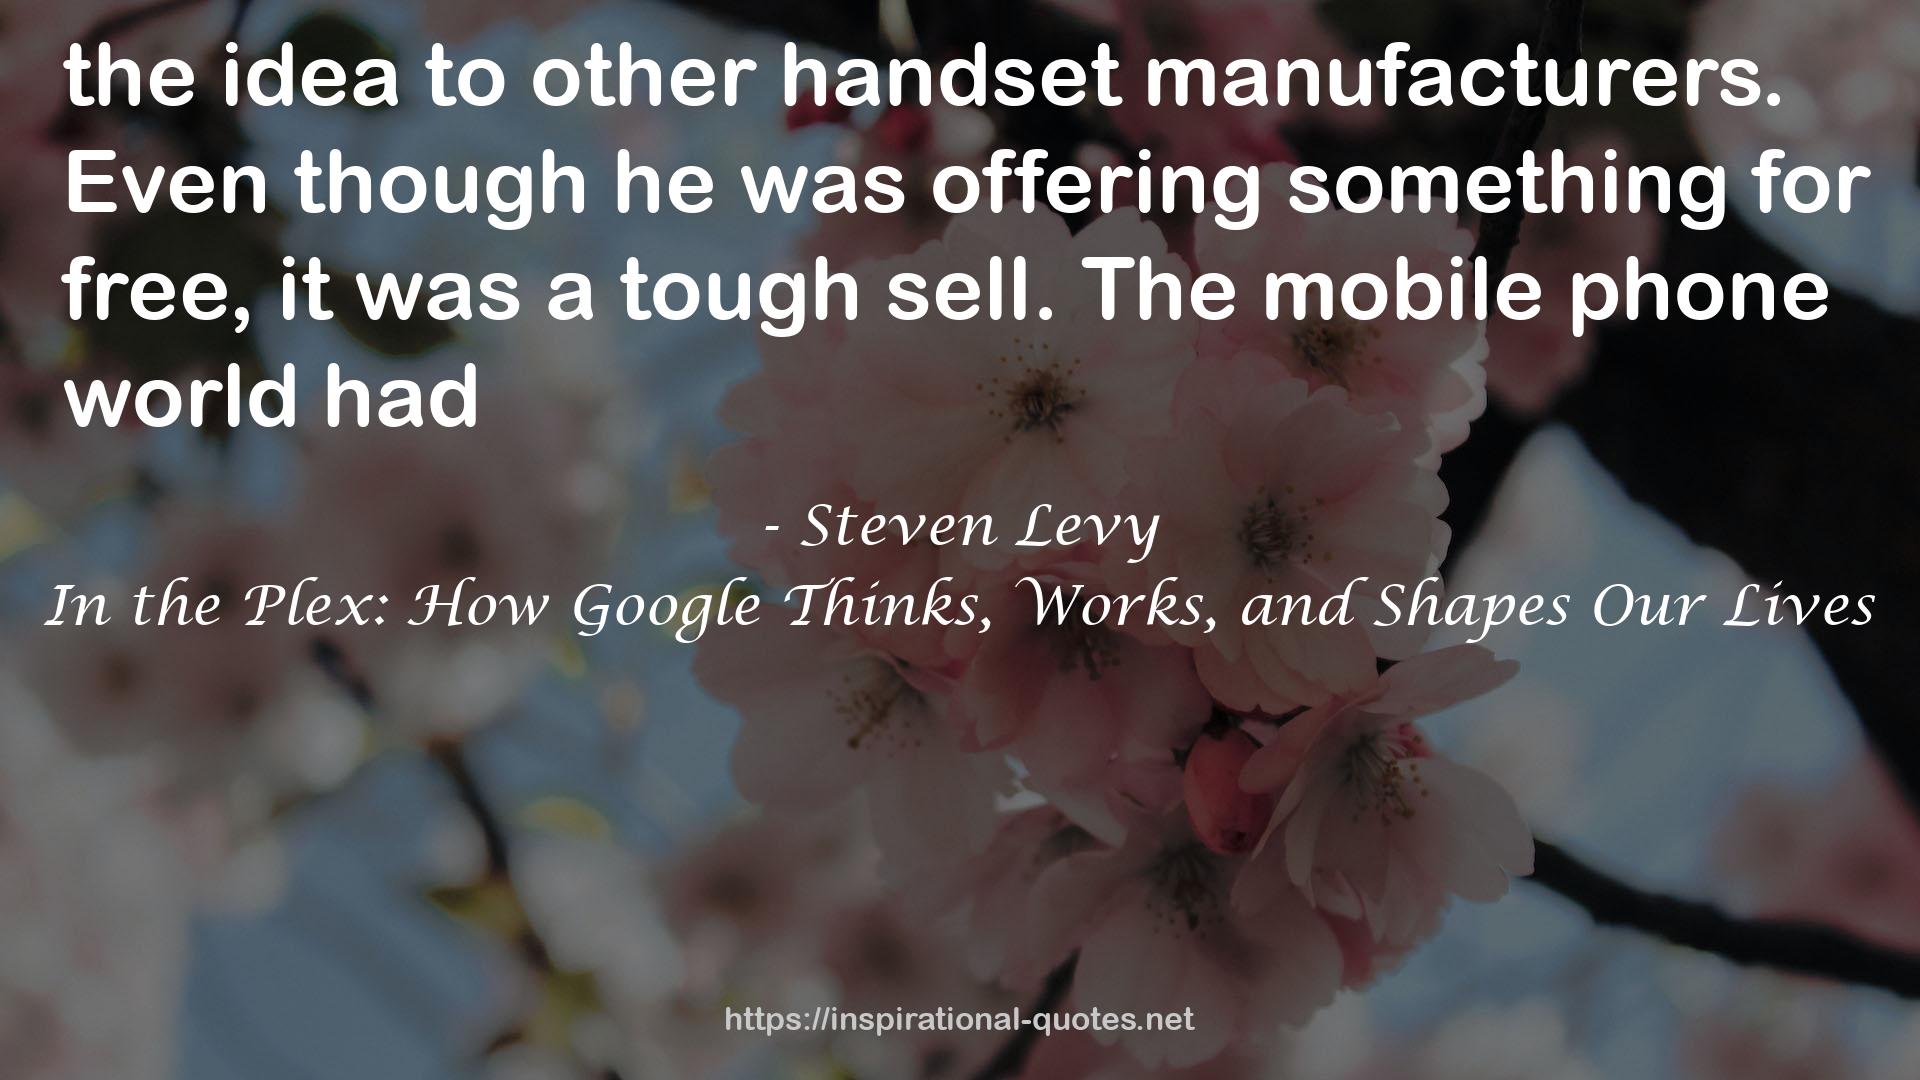 Steven Levy QUOTES